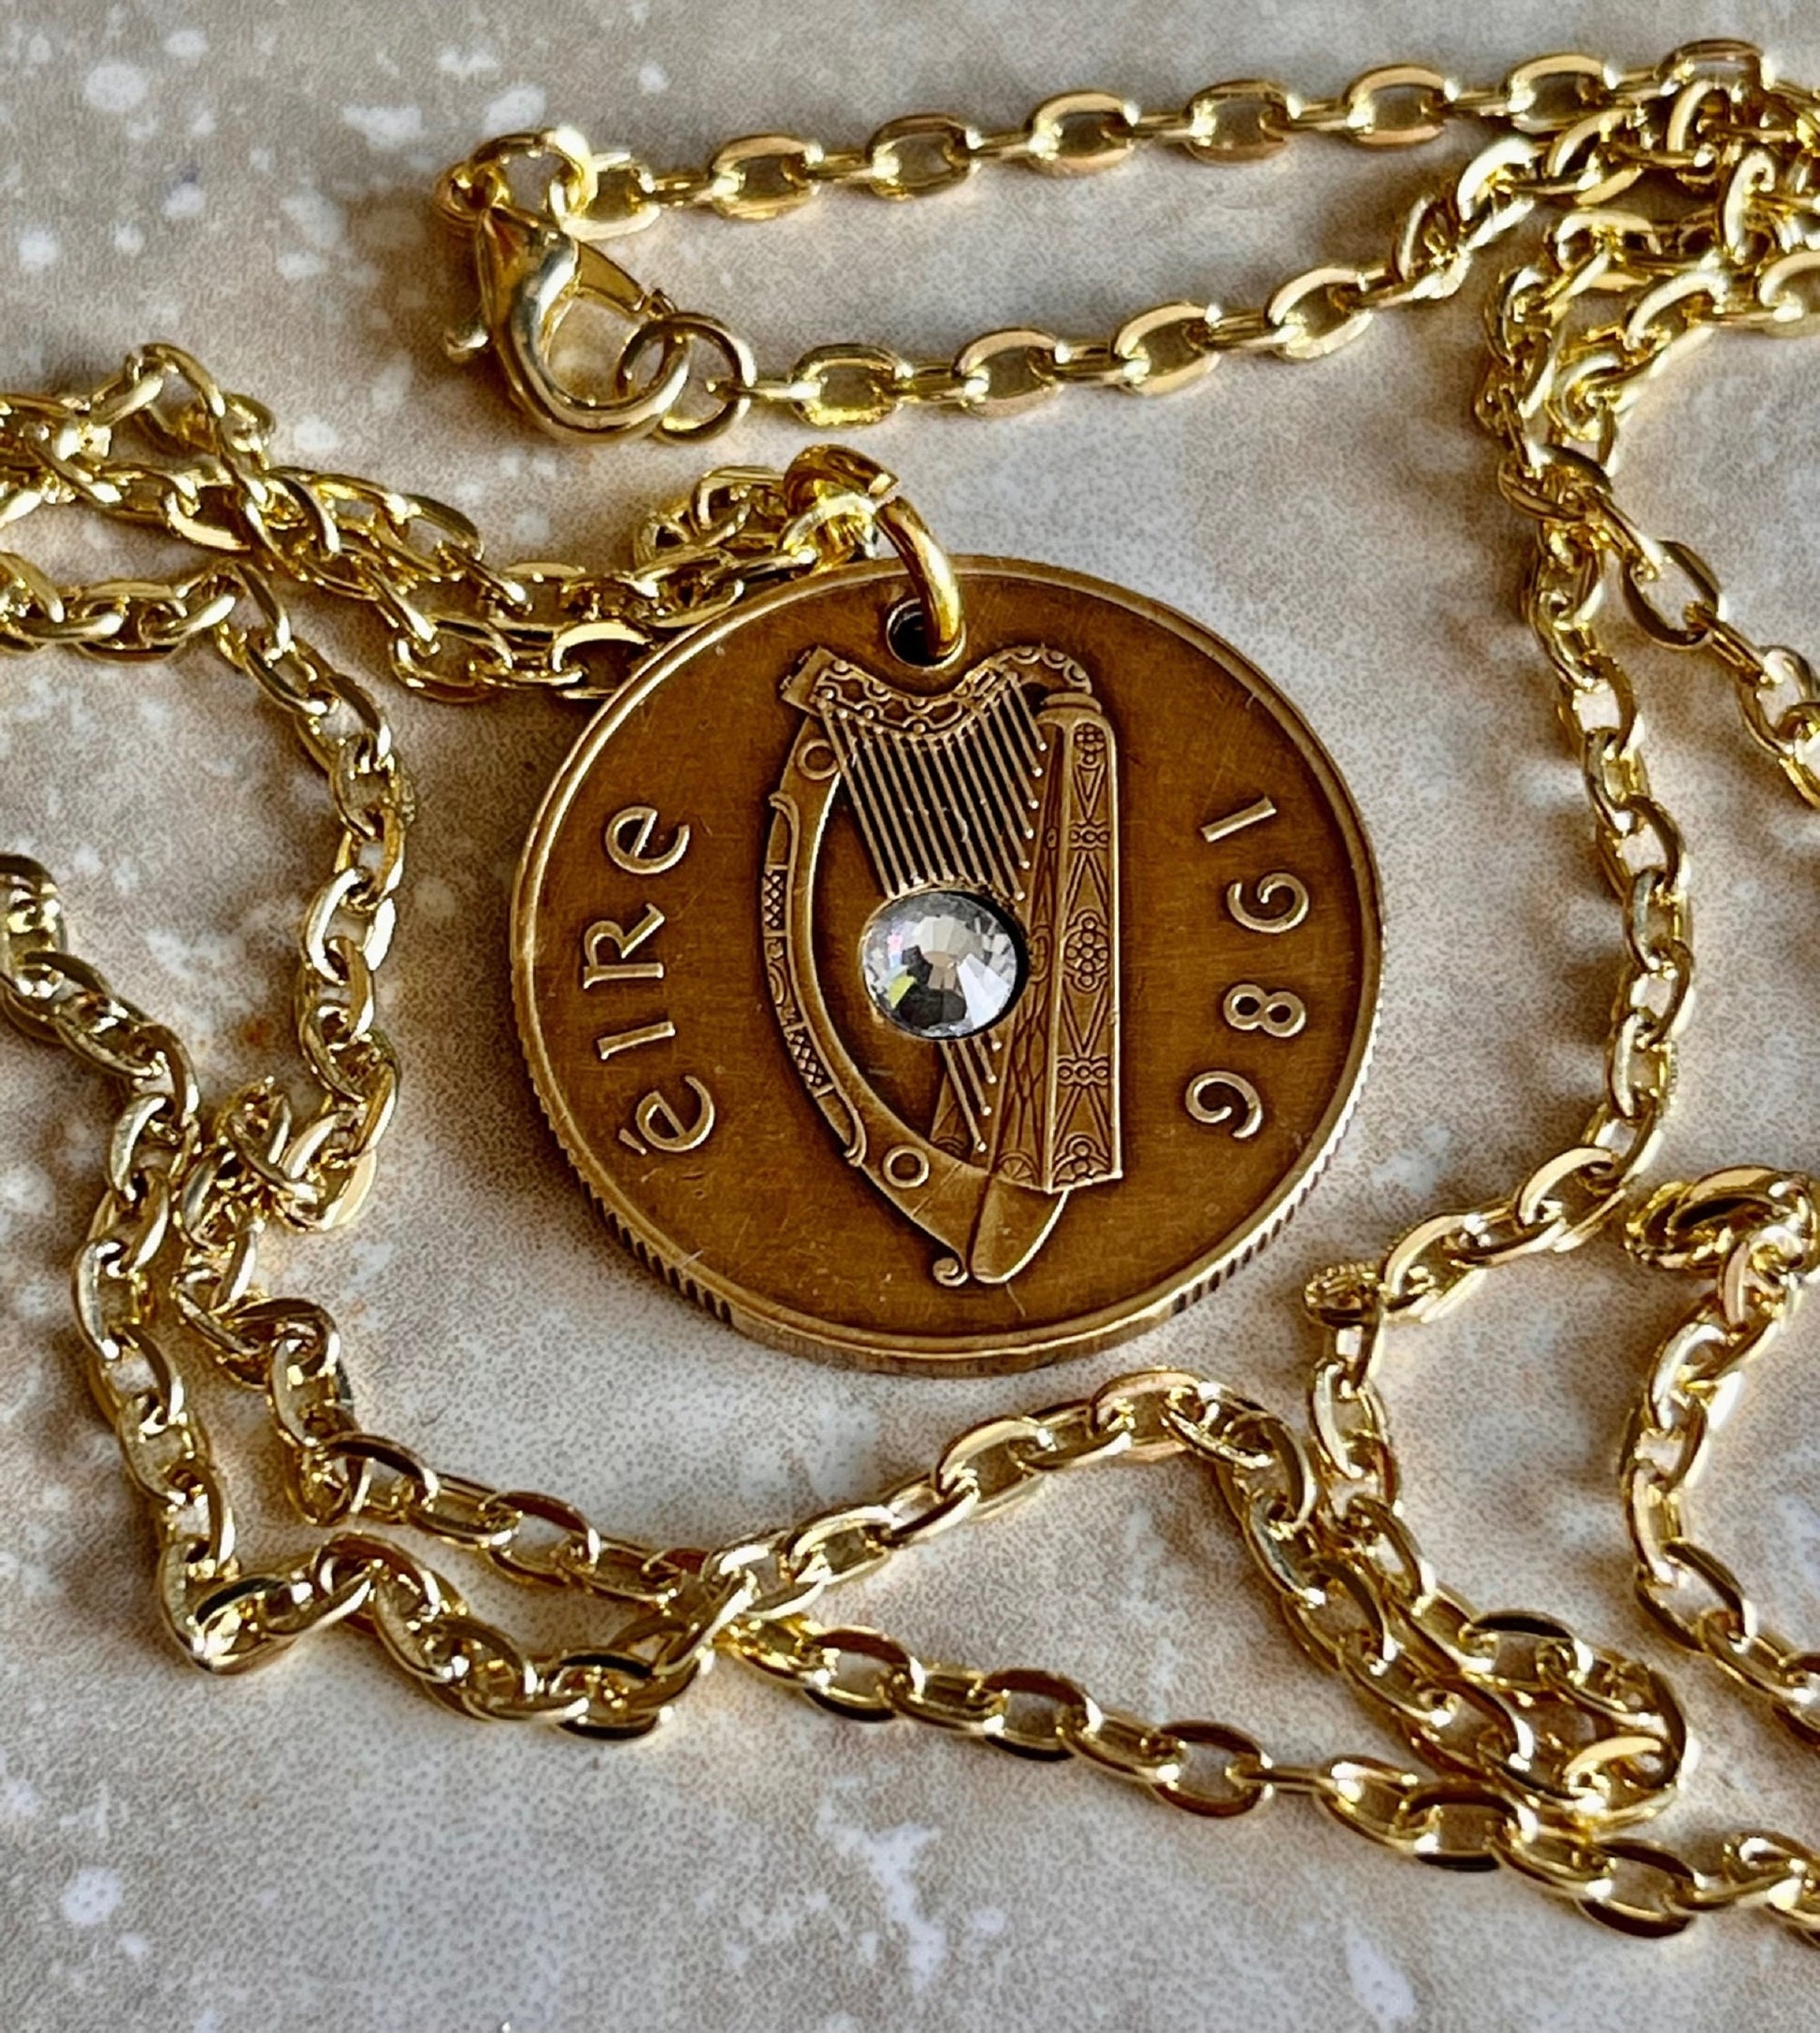 Ireland Coin Pendant 20 Pence Irish Harp Coin Necklace Rhinestone Gift For Friend Coin Charm Gift For Him, Her, Coin Collector, World Coins